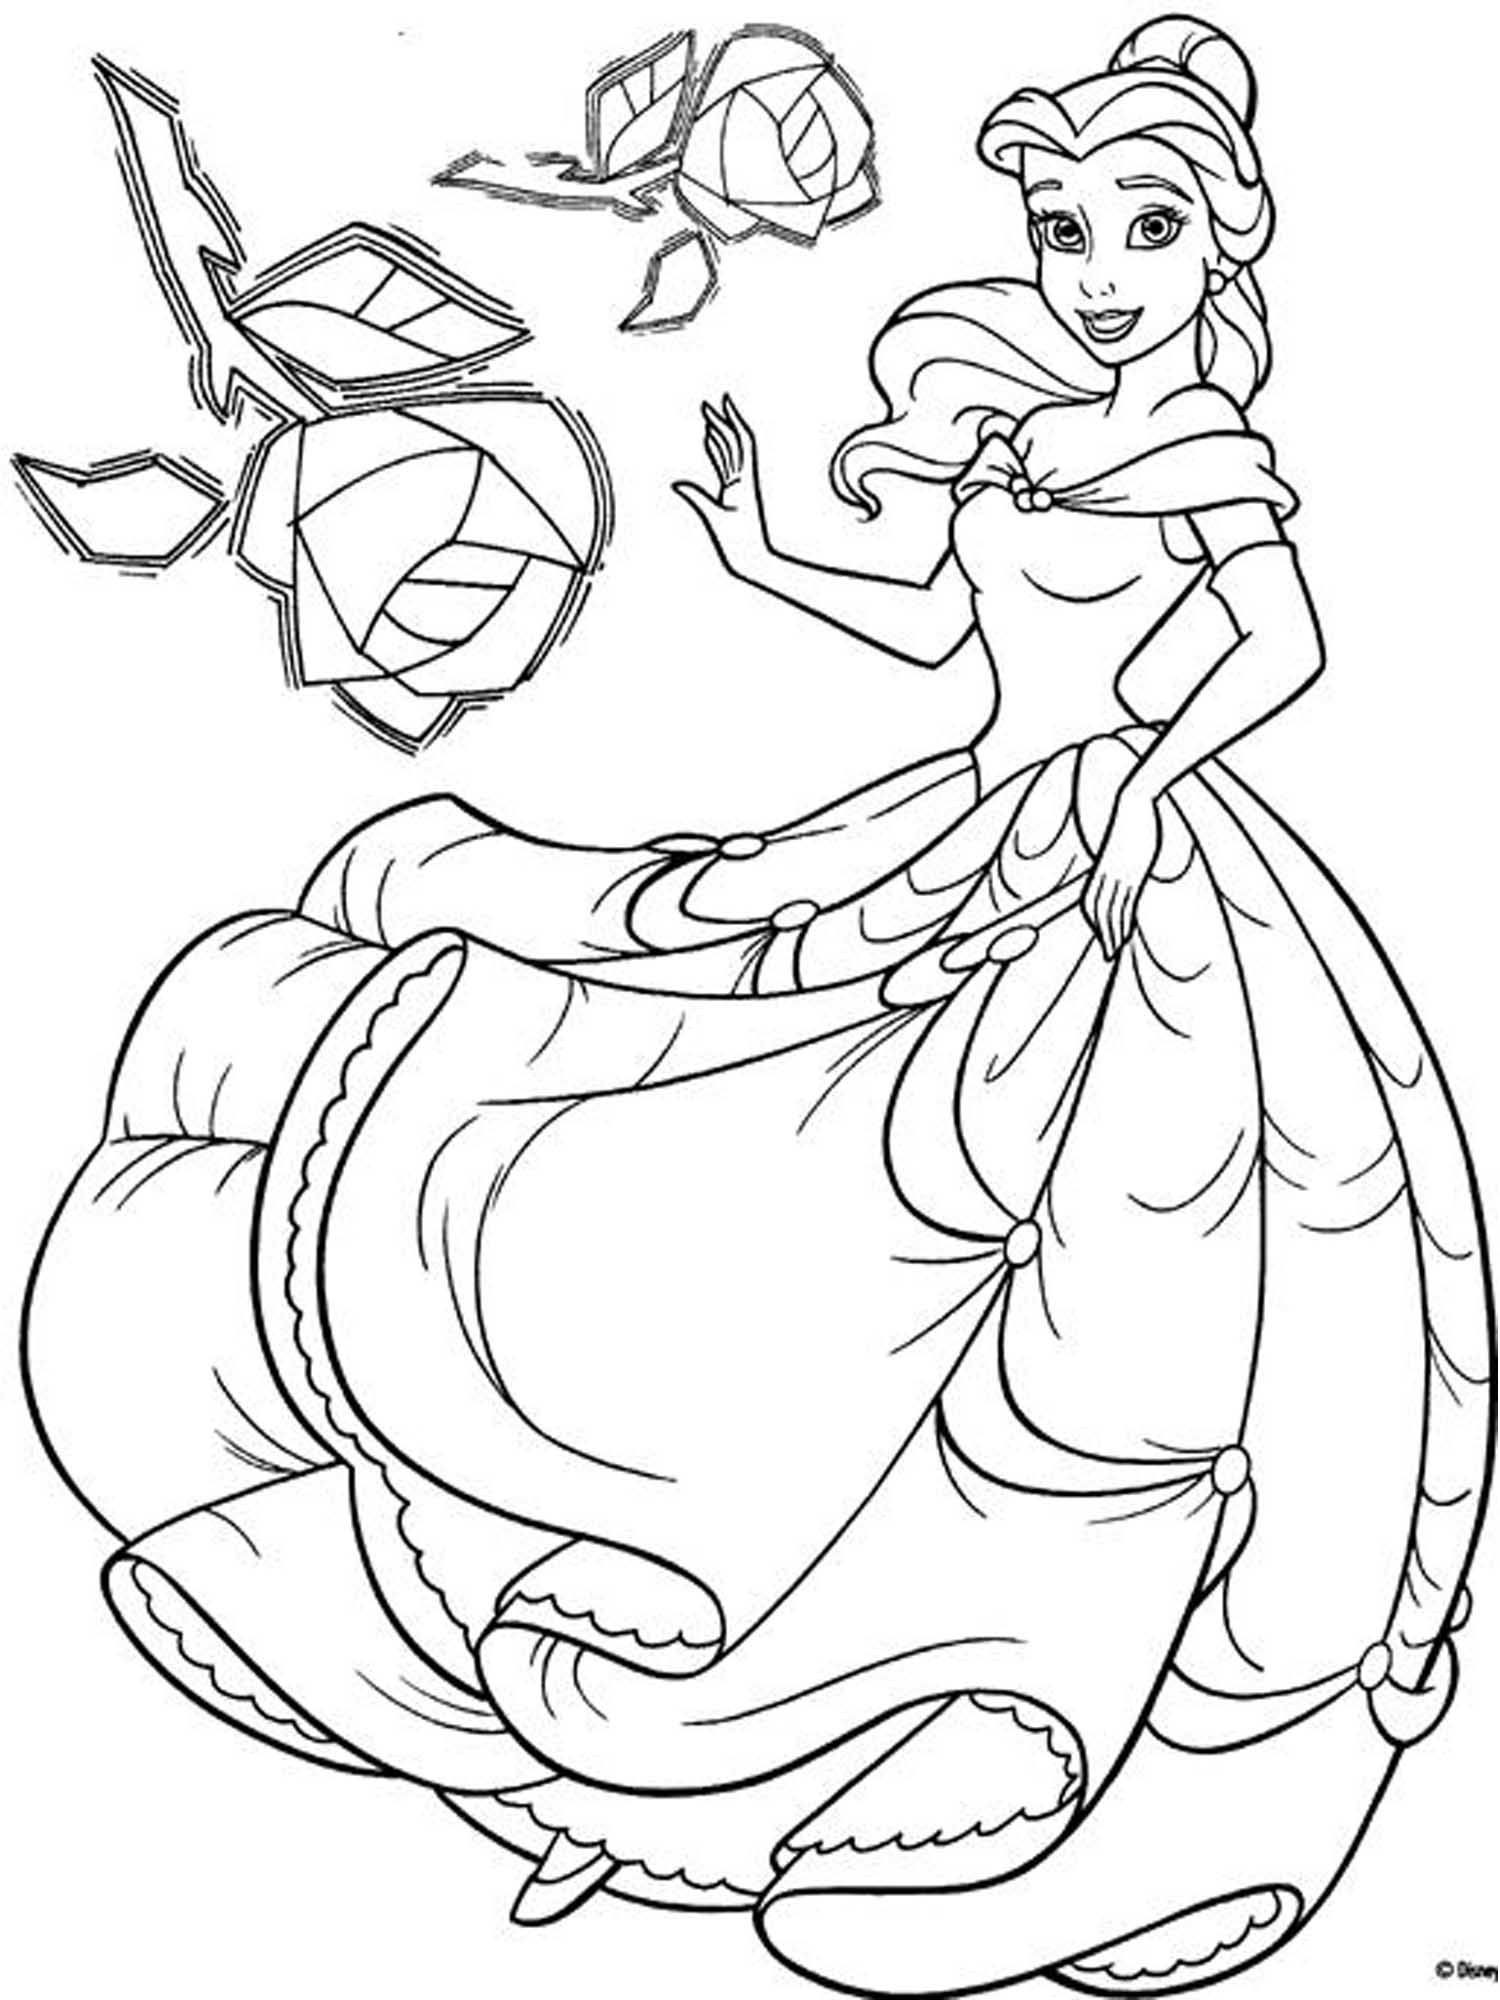 Coloring Page Of Princess Belle Wallpaper